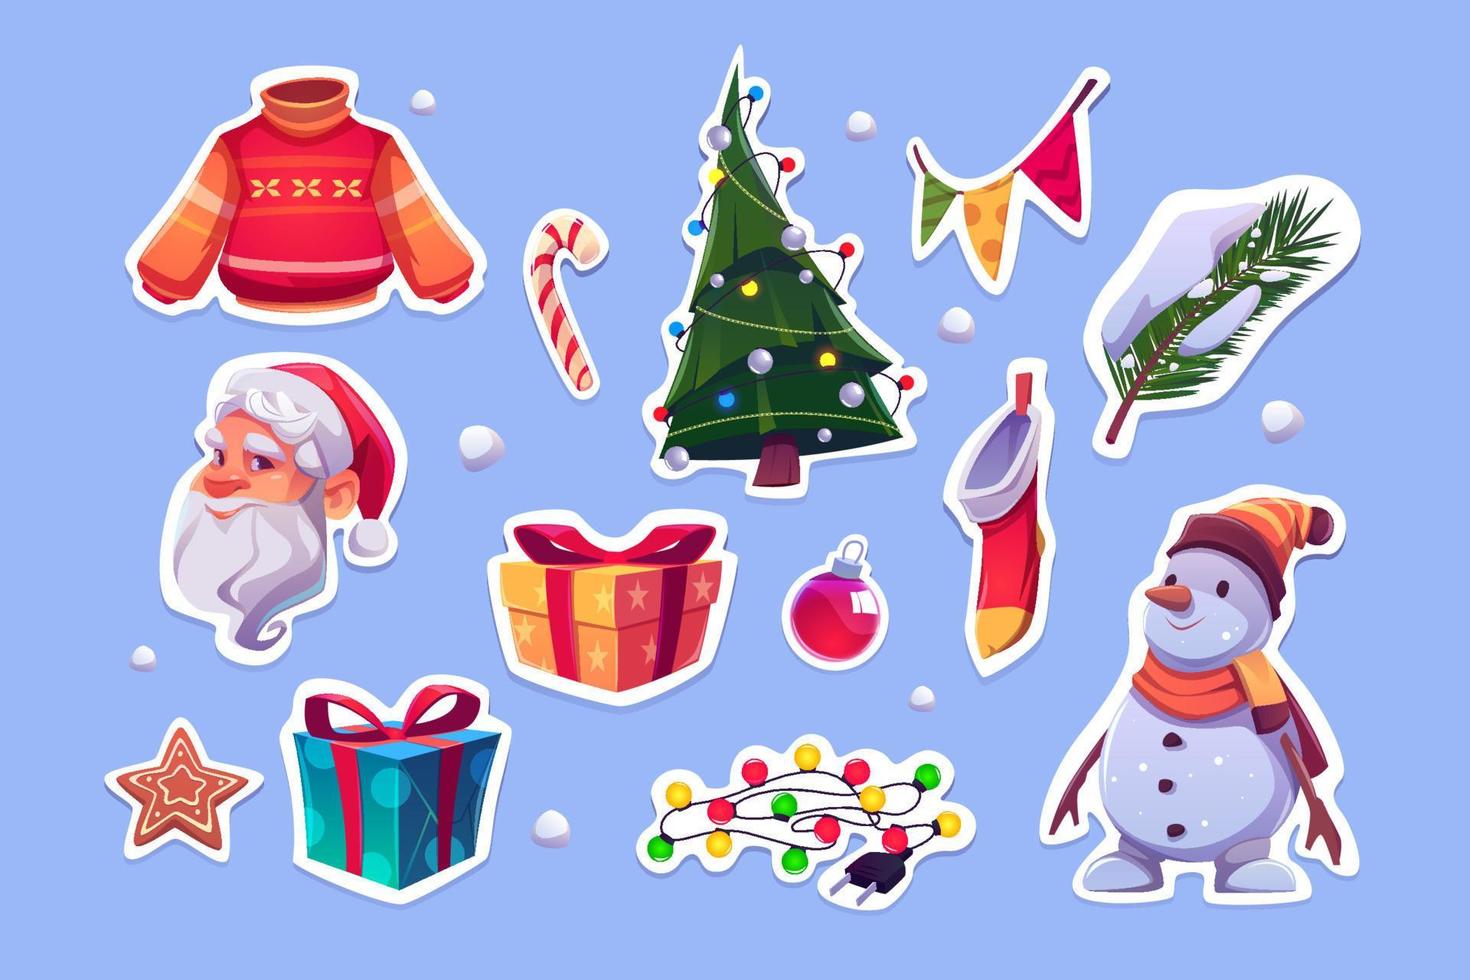 Christmas stickers with Santa Claus and pine tree vector